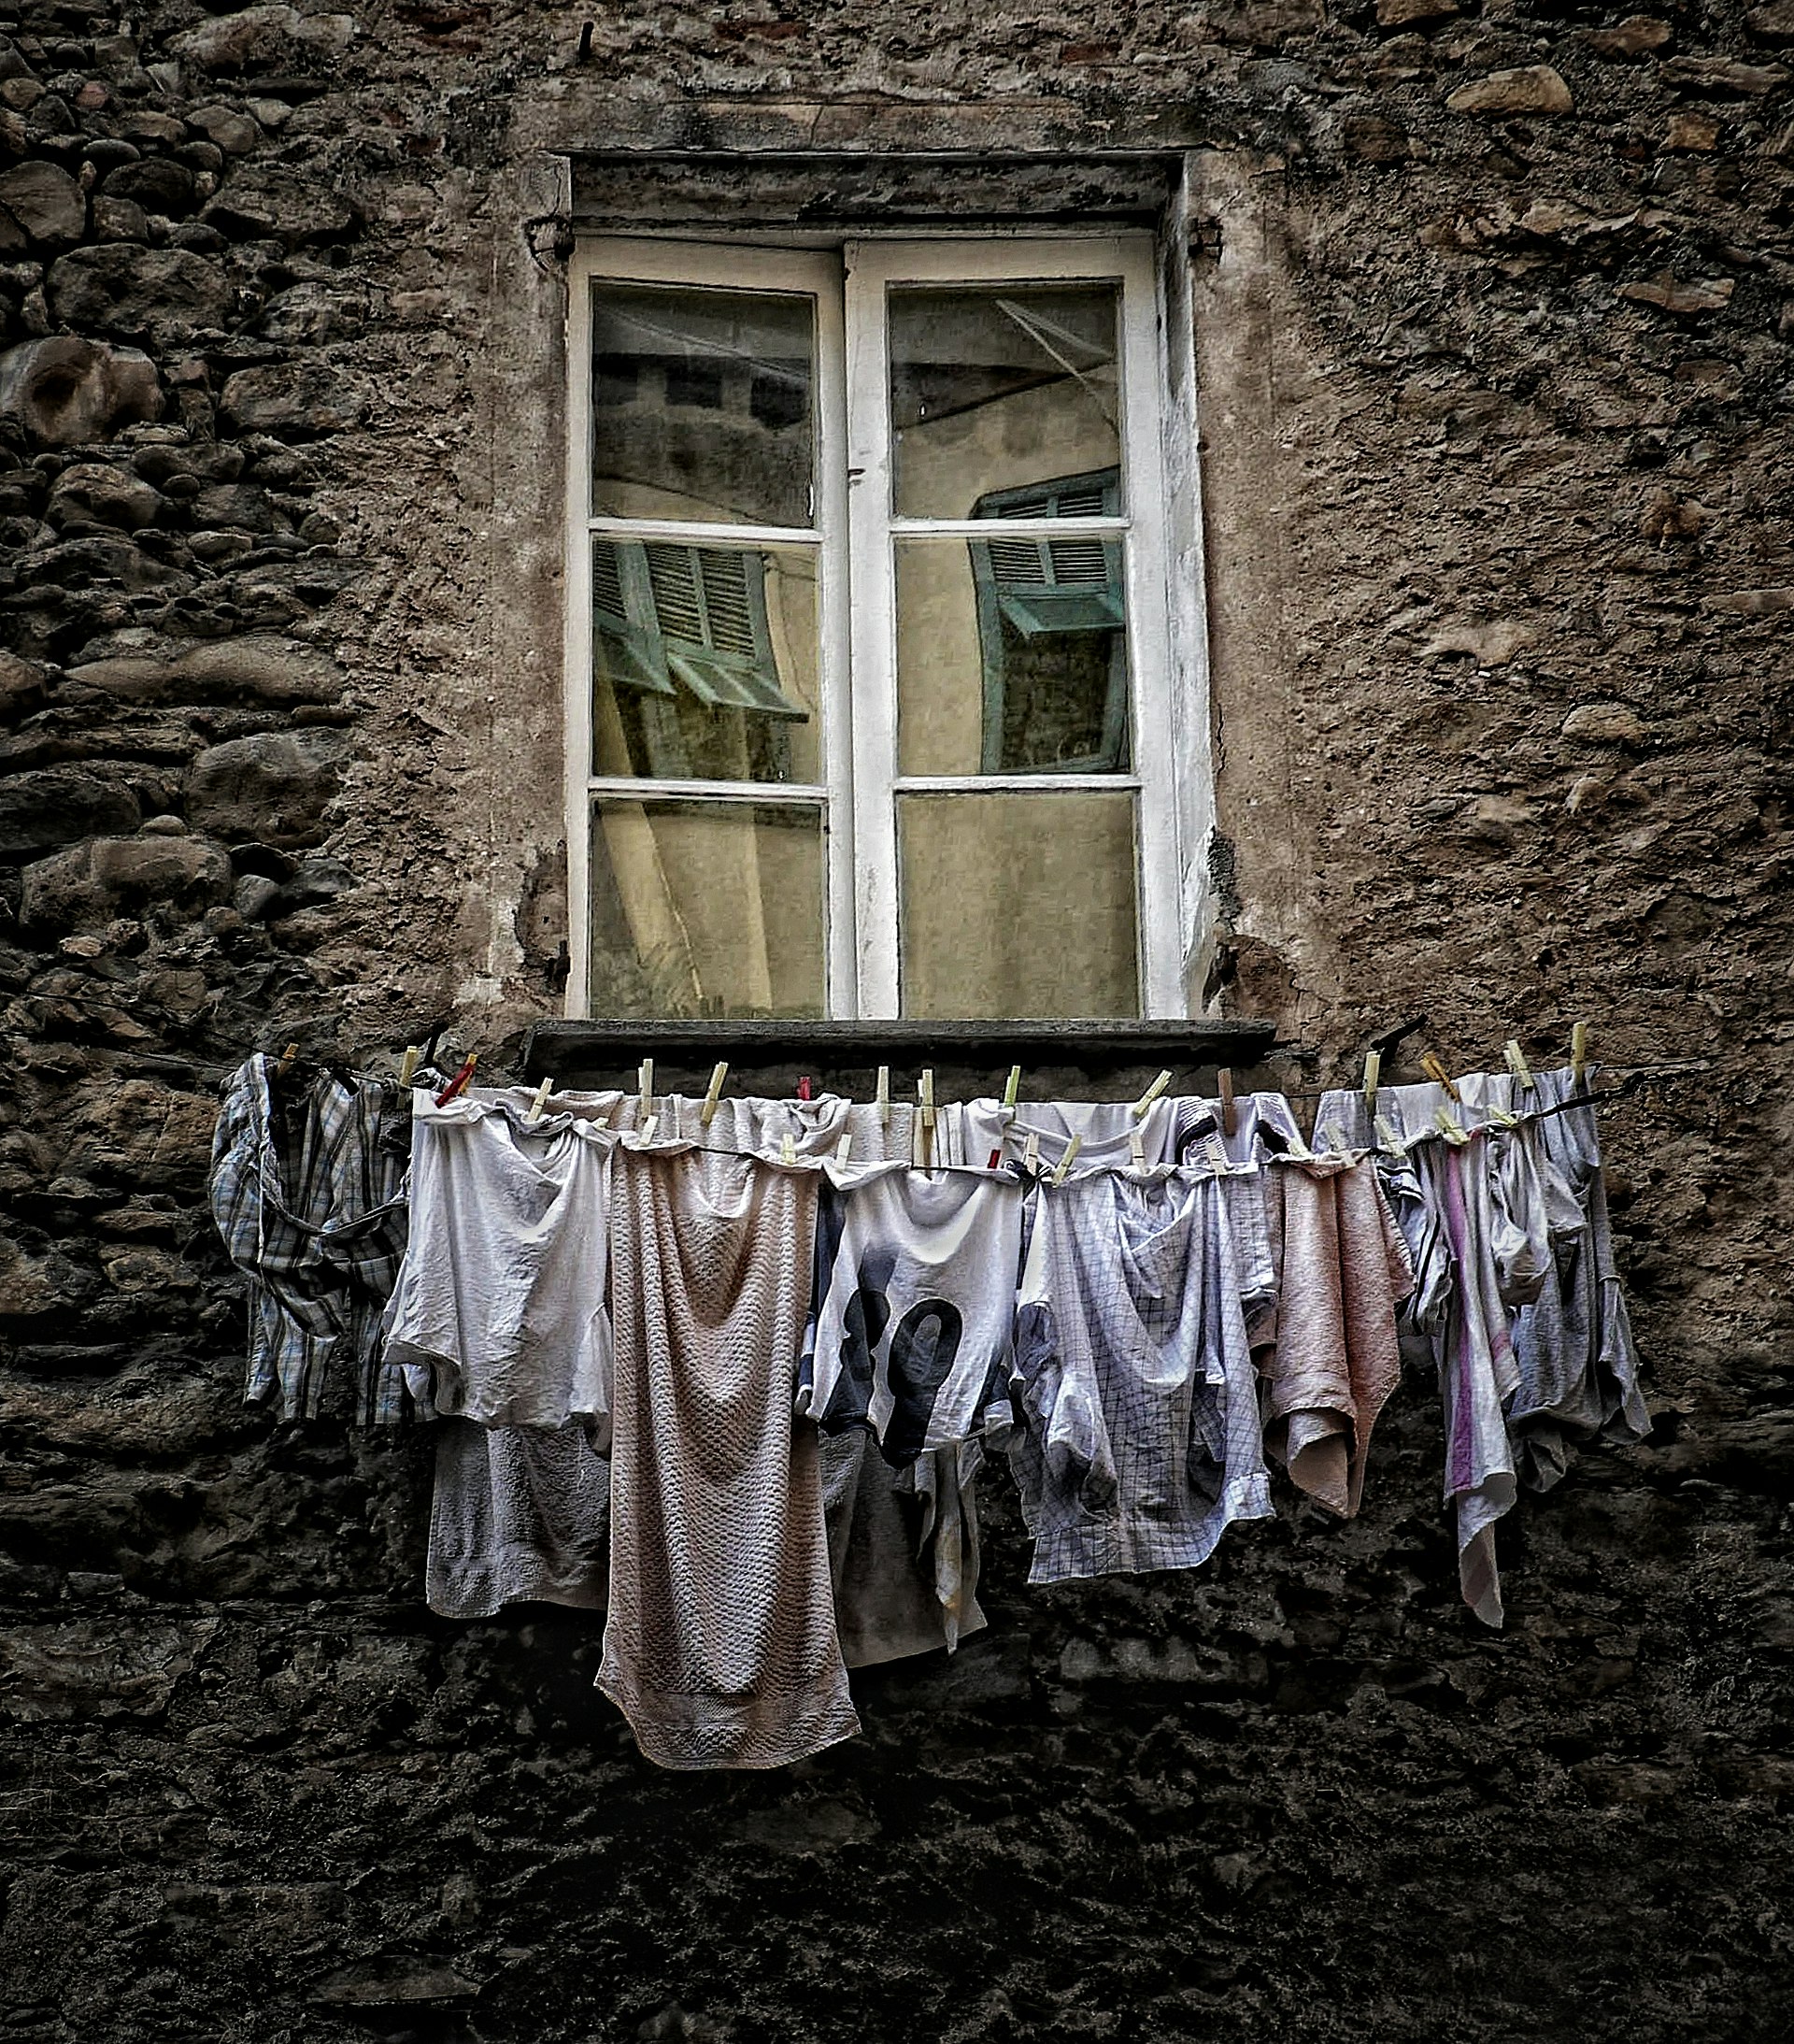 assorted clothes hanged under the window